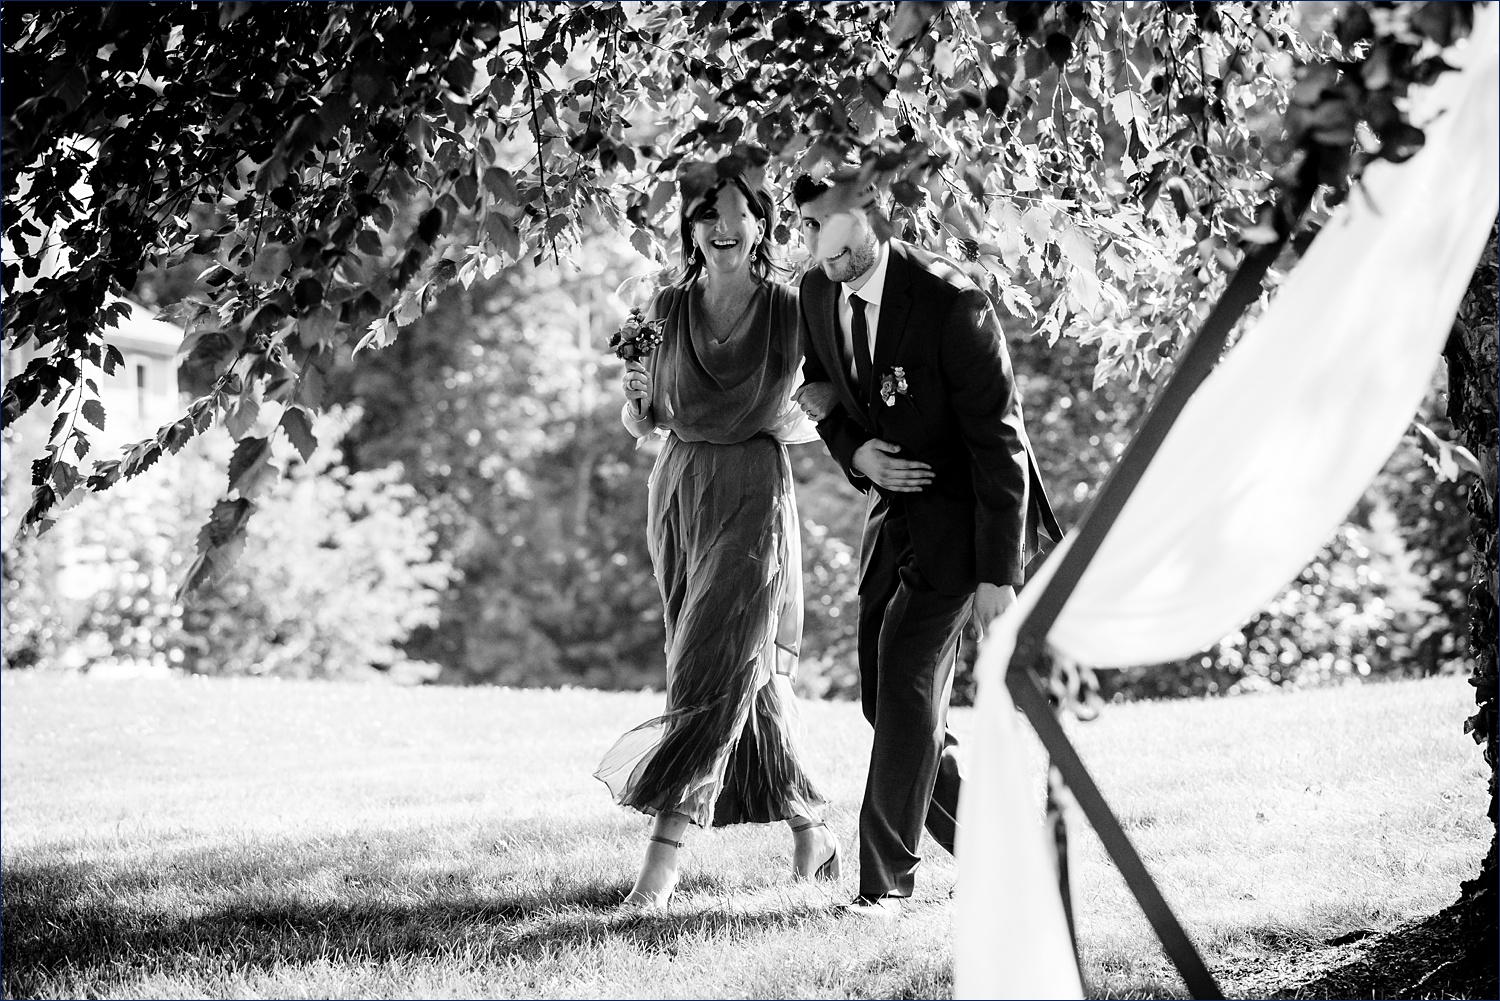 The groom and his mom peek through the trees as he goes to enter the backyard intimate wedding ceremony